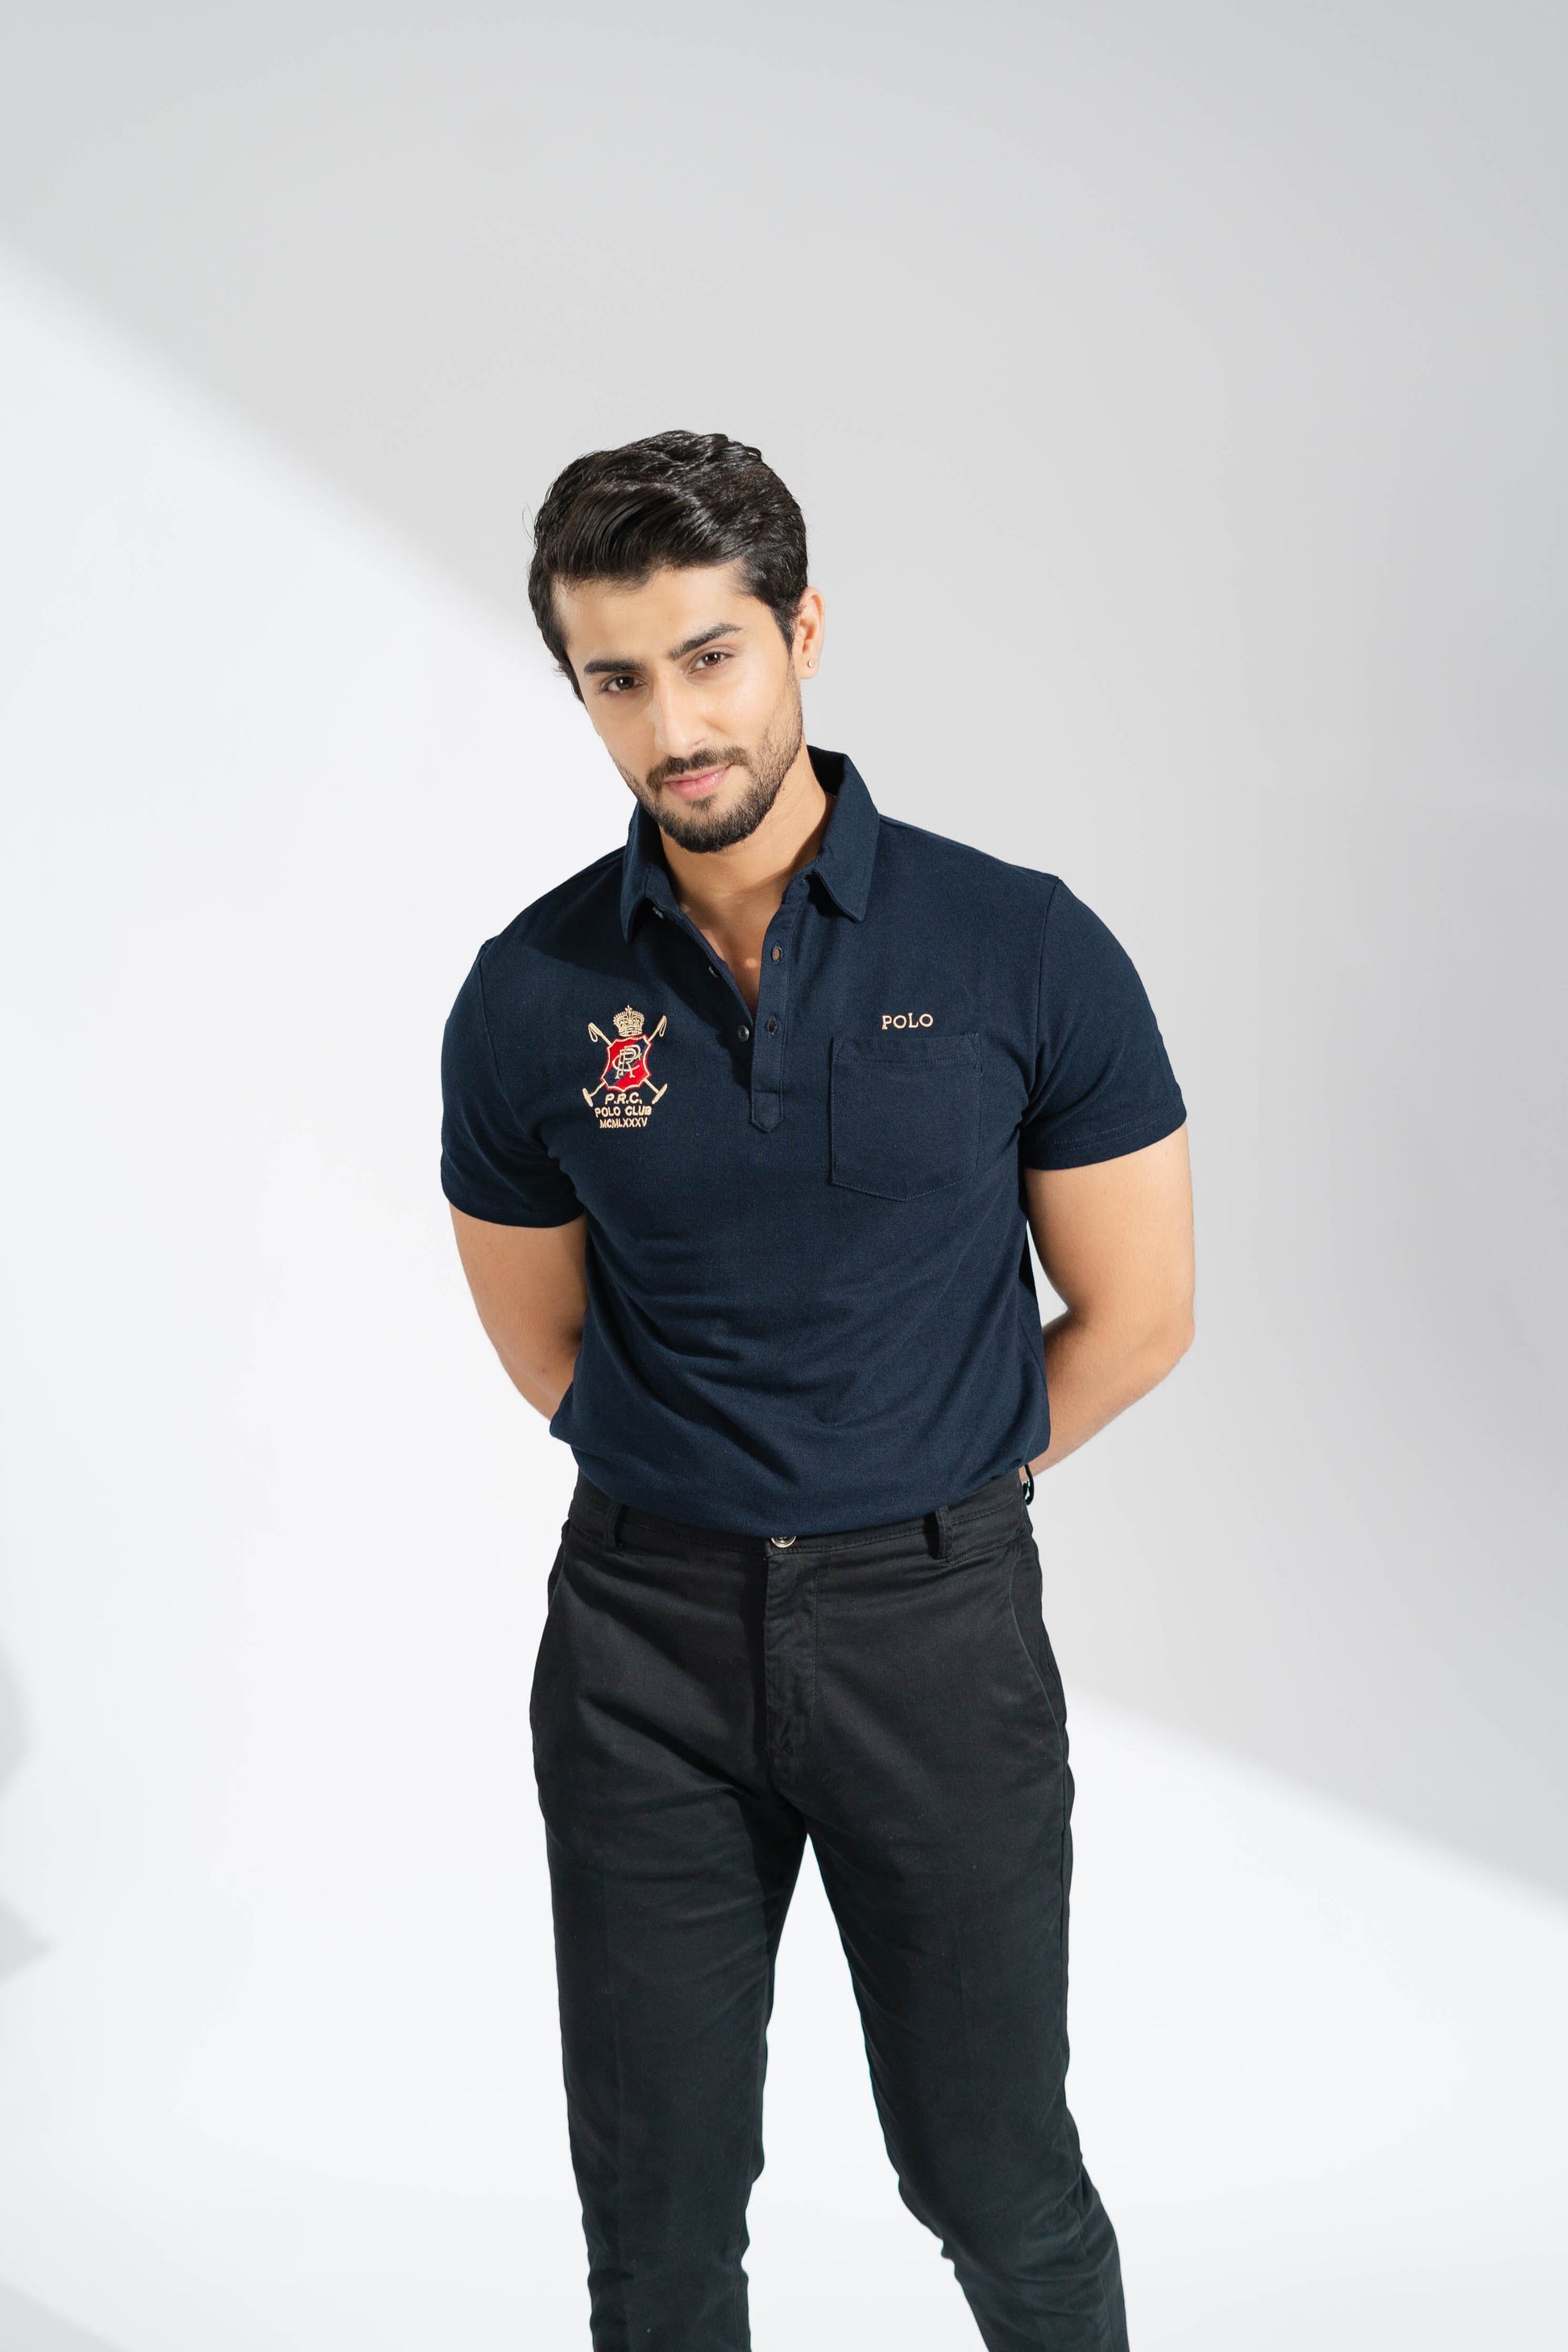 elo - Polo Republica Men's PRC Crest And Pony Embroidered